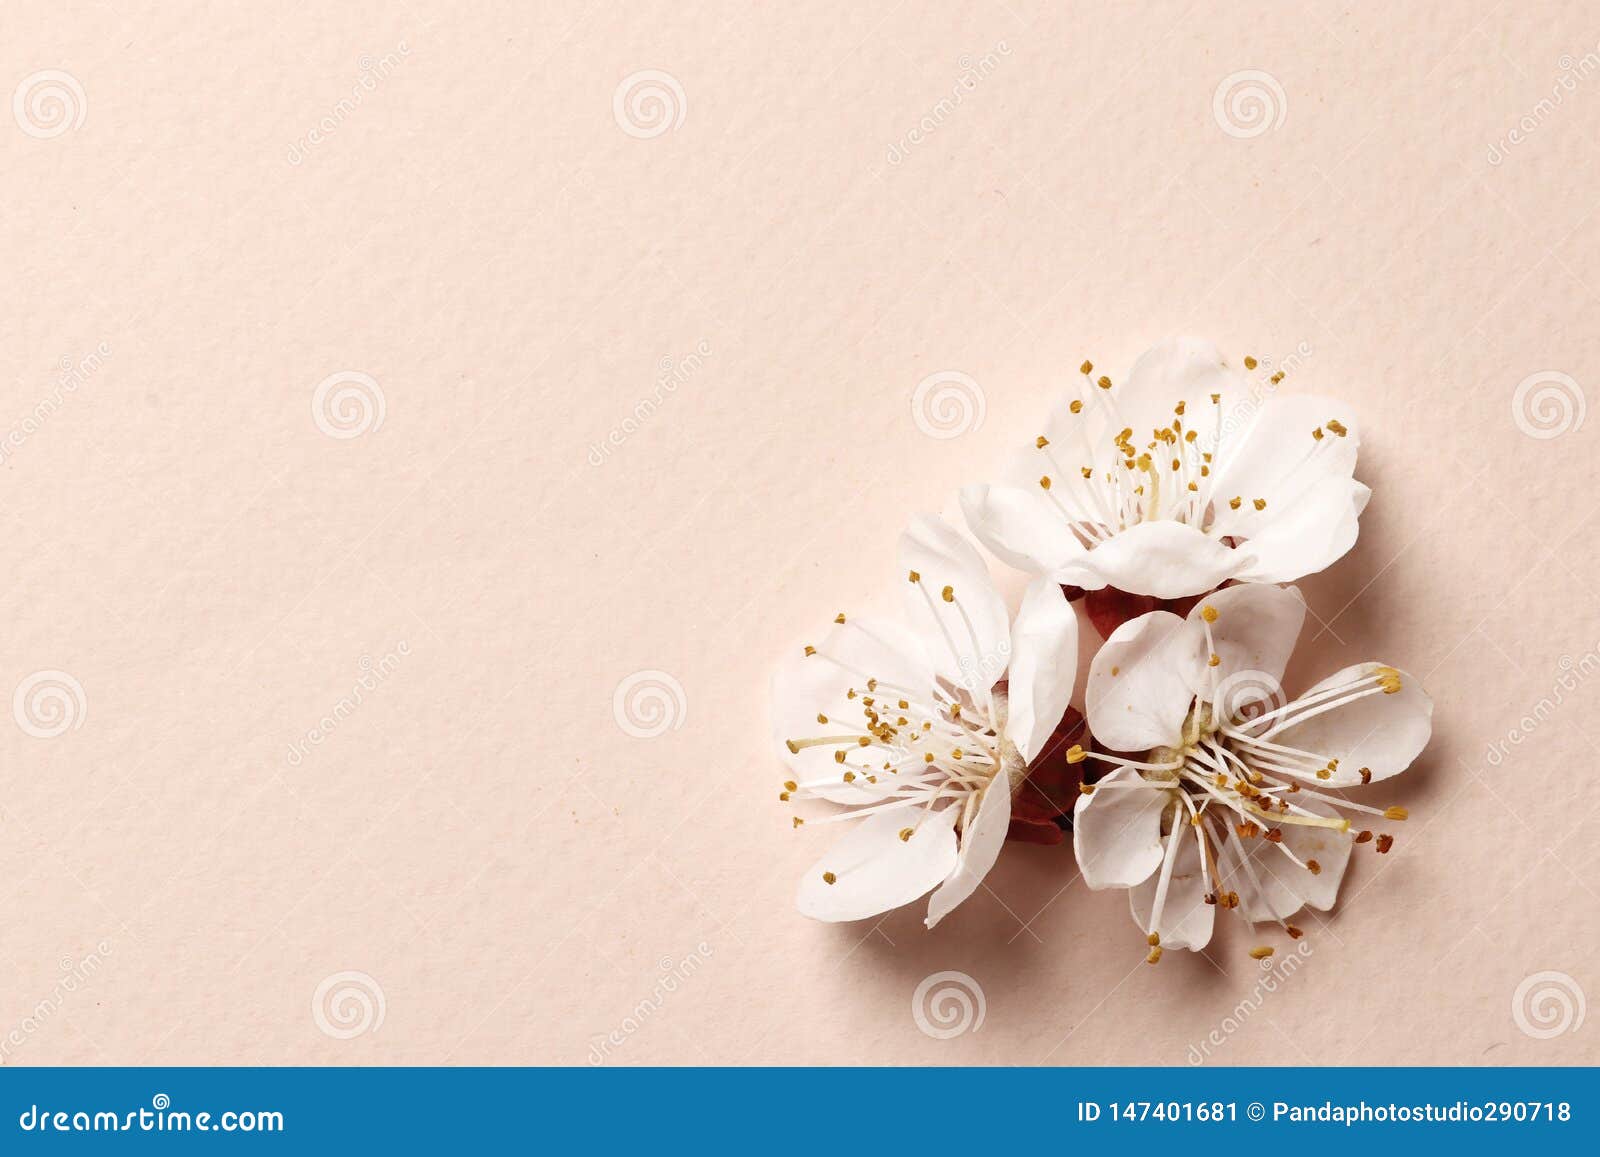 Spring Floral Background, Texture and Wallpaper Stock Image - Image of  flatlay, layout: 147401681